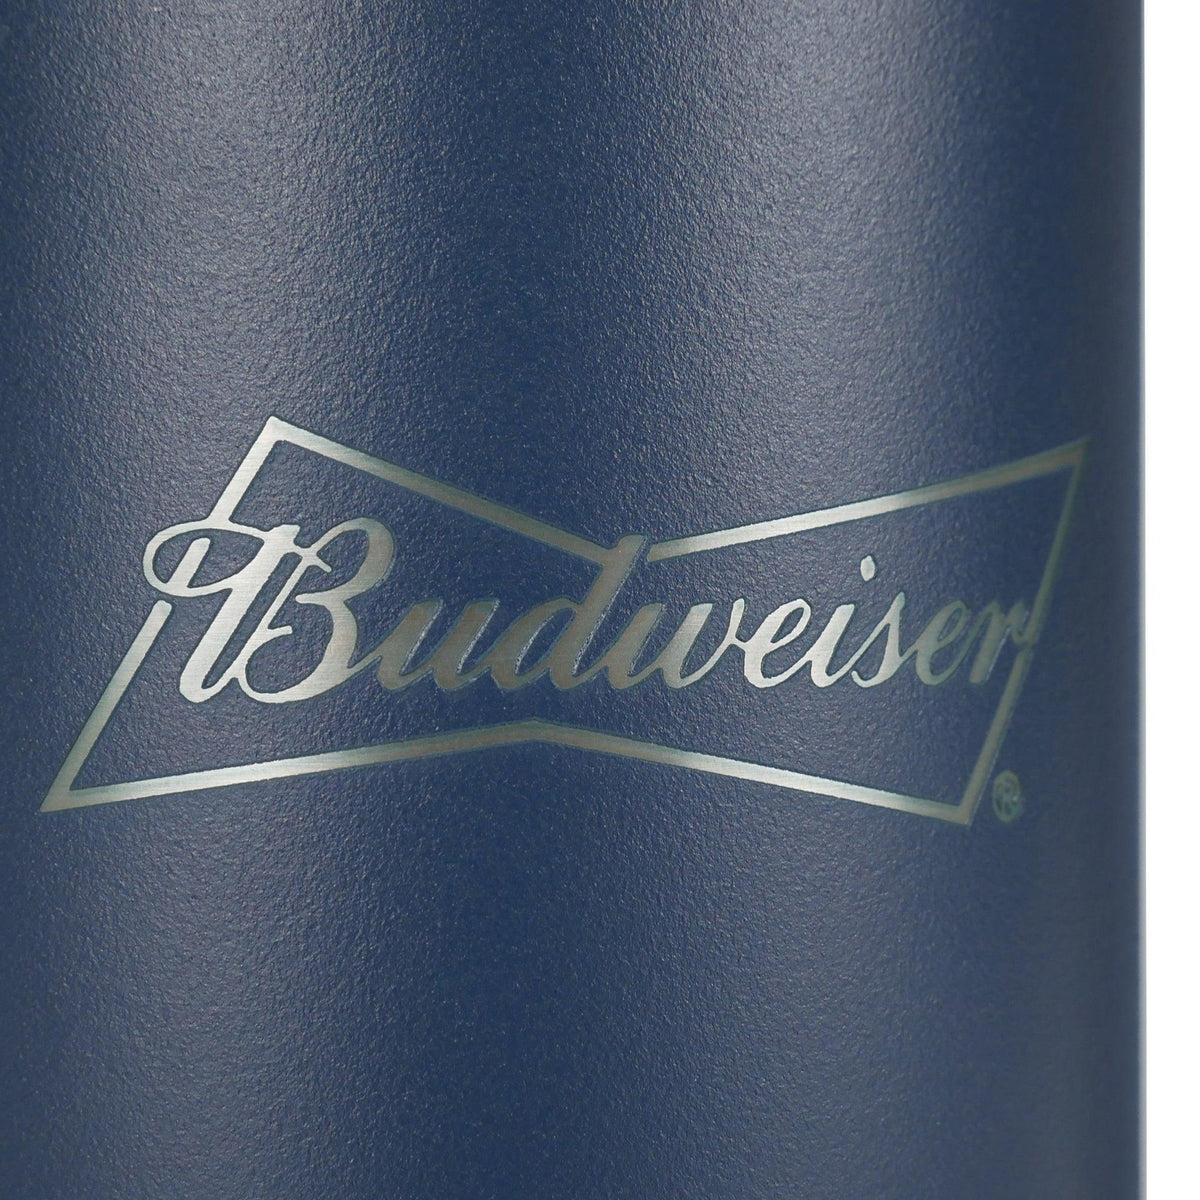 https://www.shopbeergears.shop/wp-content/uploads/1692/92/looking-for-a-budweiser-yeti-12oz-can-colster-budweiser-to-buy-get-it-now-before-they-are-gone_1.jpg